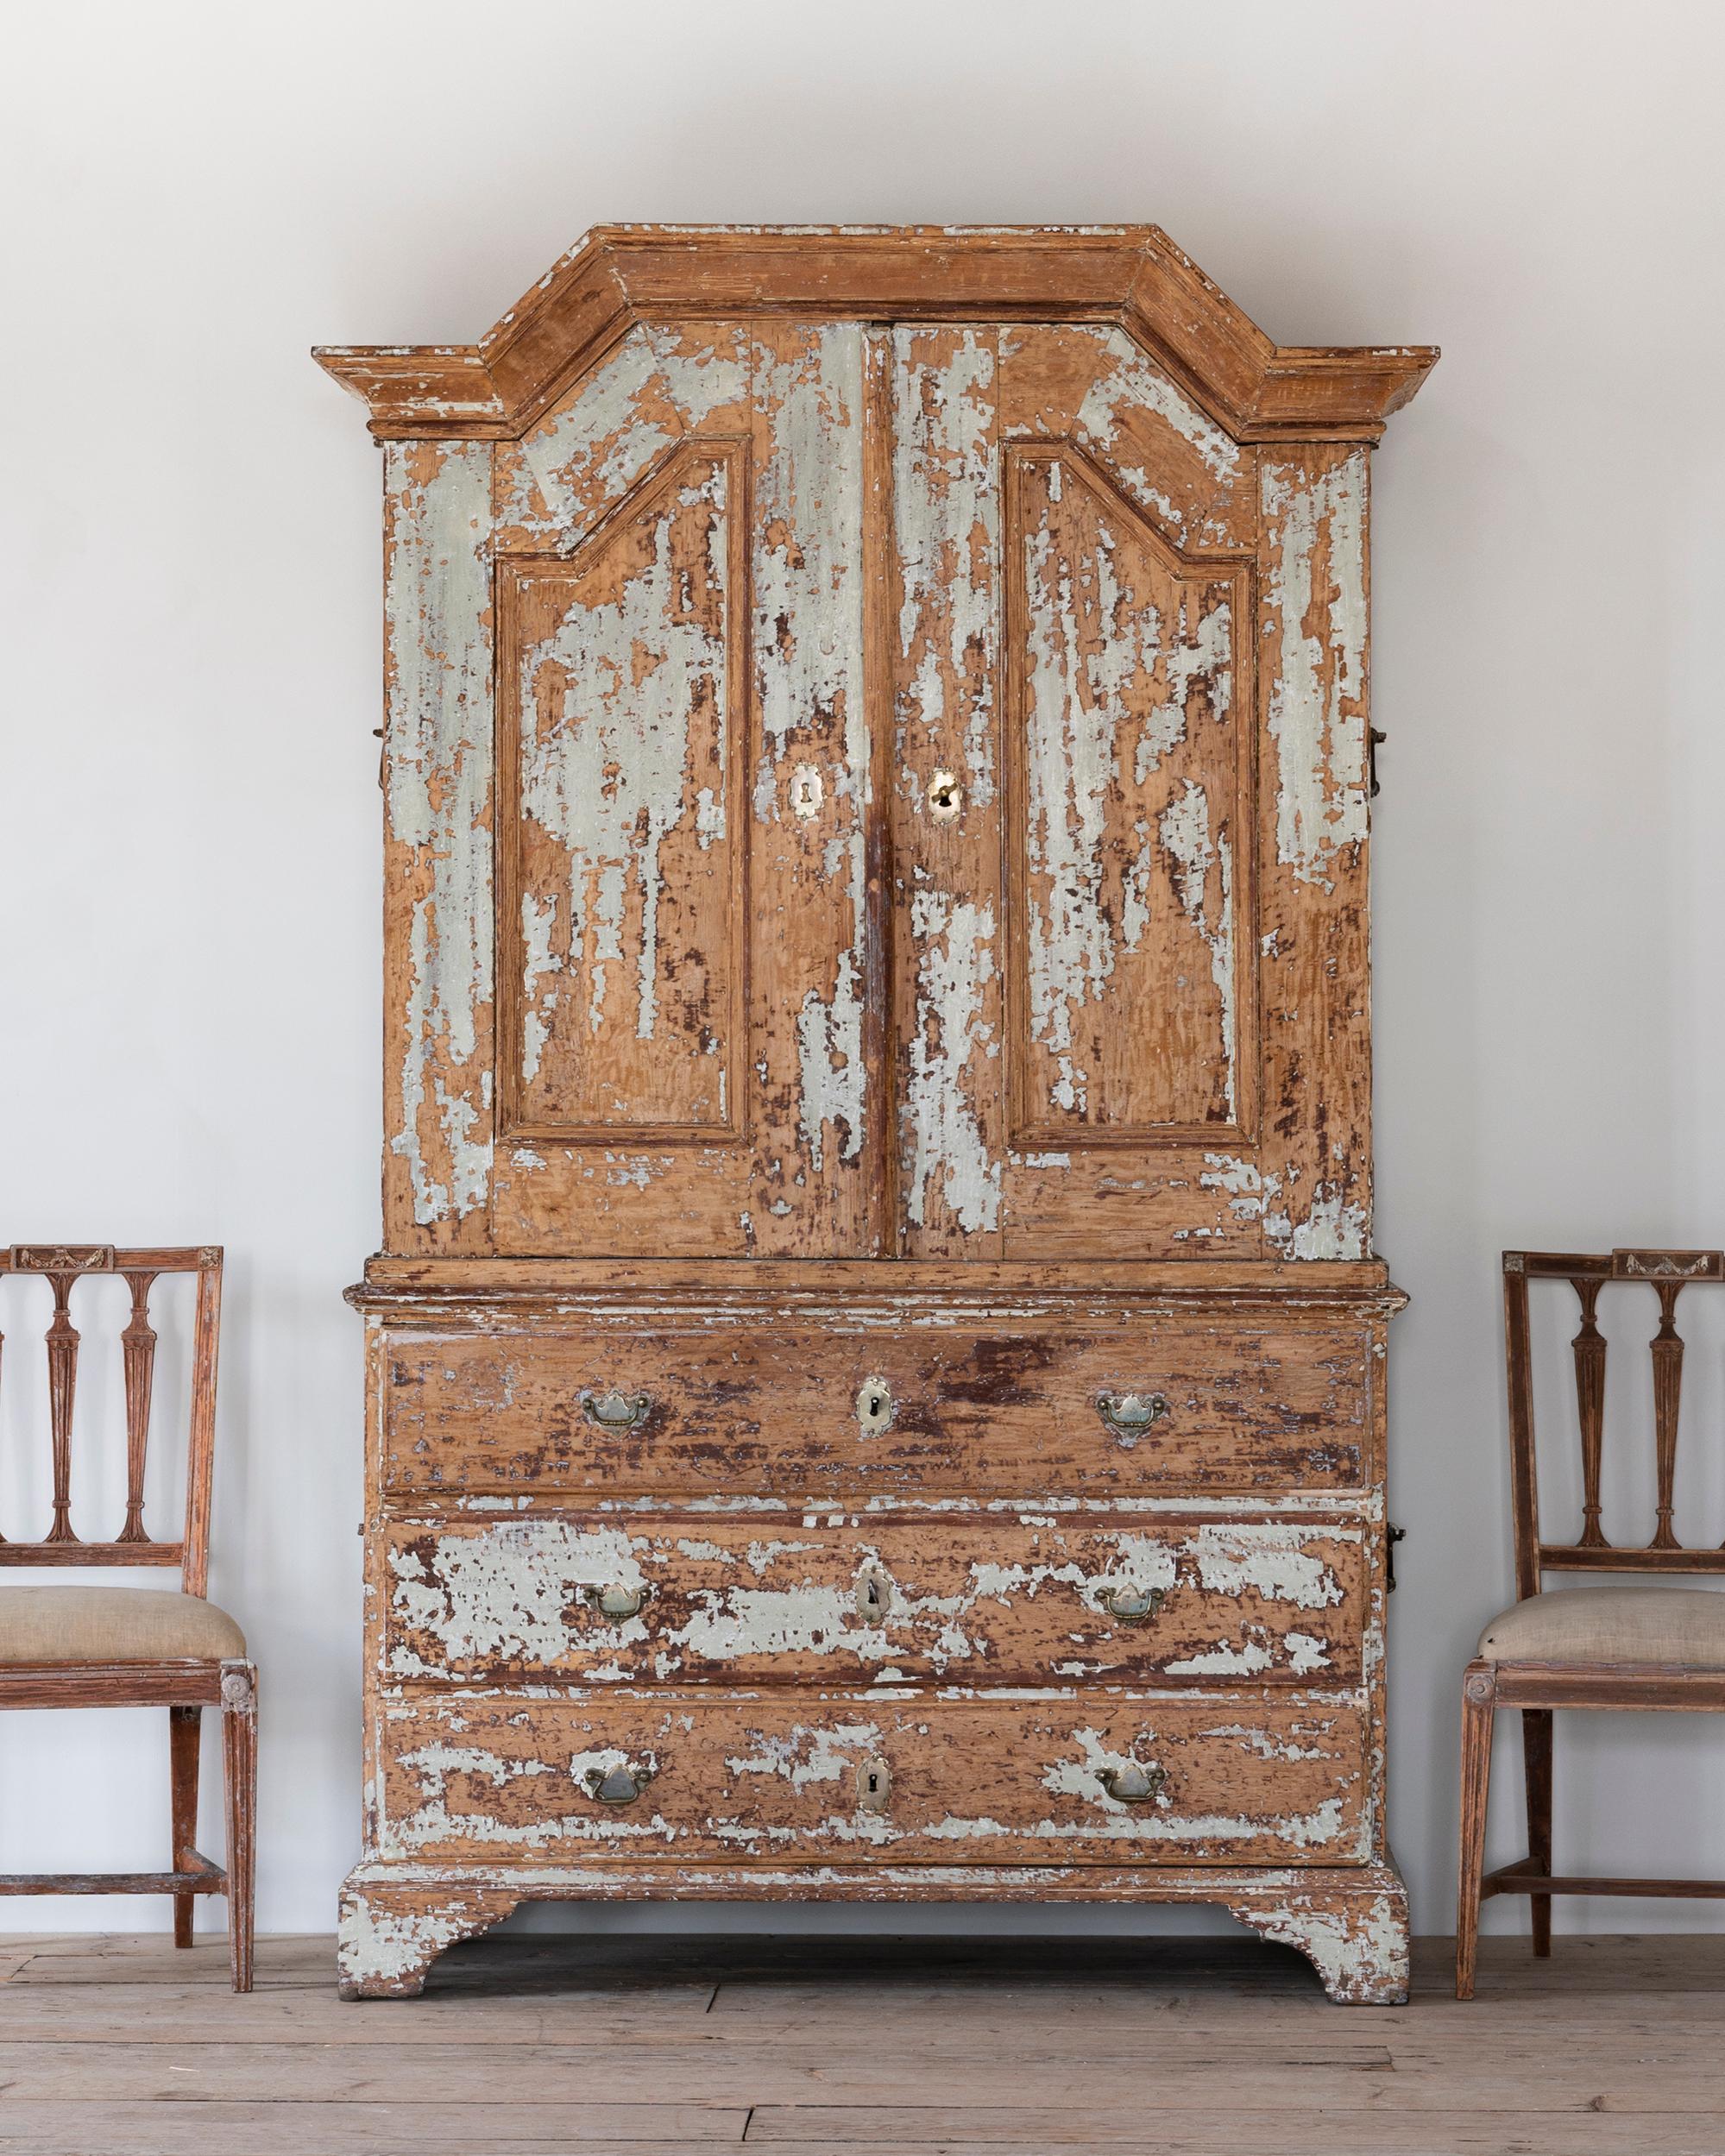 Fine 18th century Swedish late Baroque cabinet in Its original finish with traces of newer historical colours. Ca 1750 Sweden. 

Originally beige/yellow, then painted red and finally in a blue/gray colour that was popular in the early 19th century. 